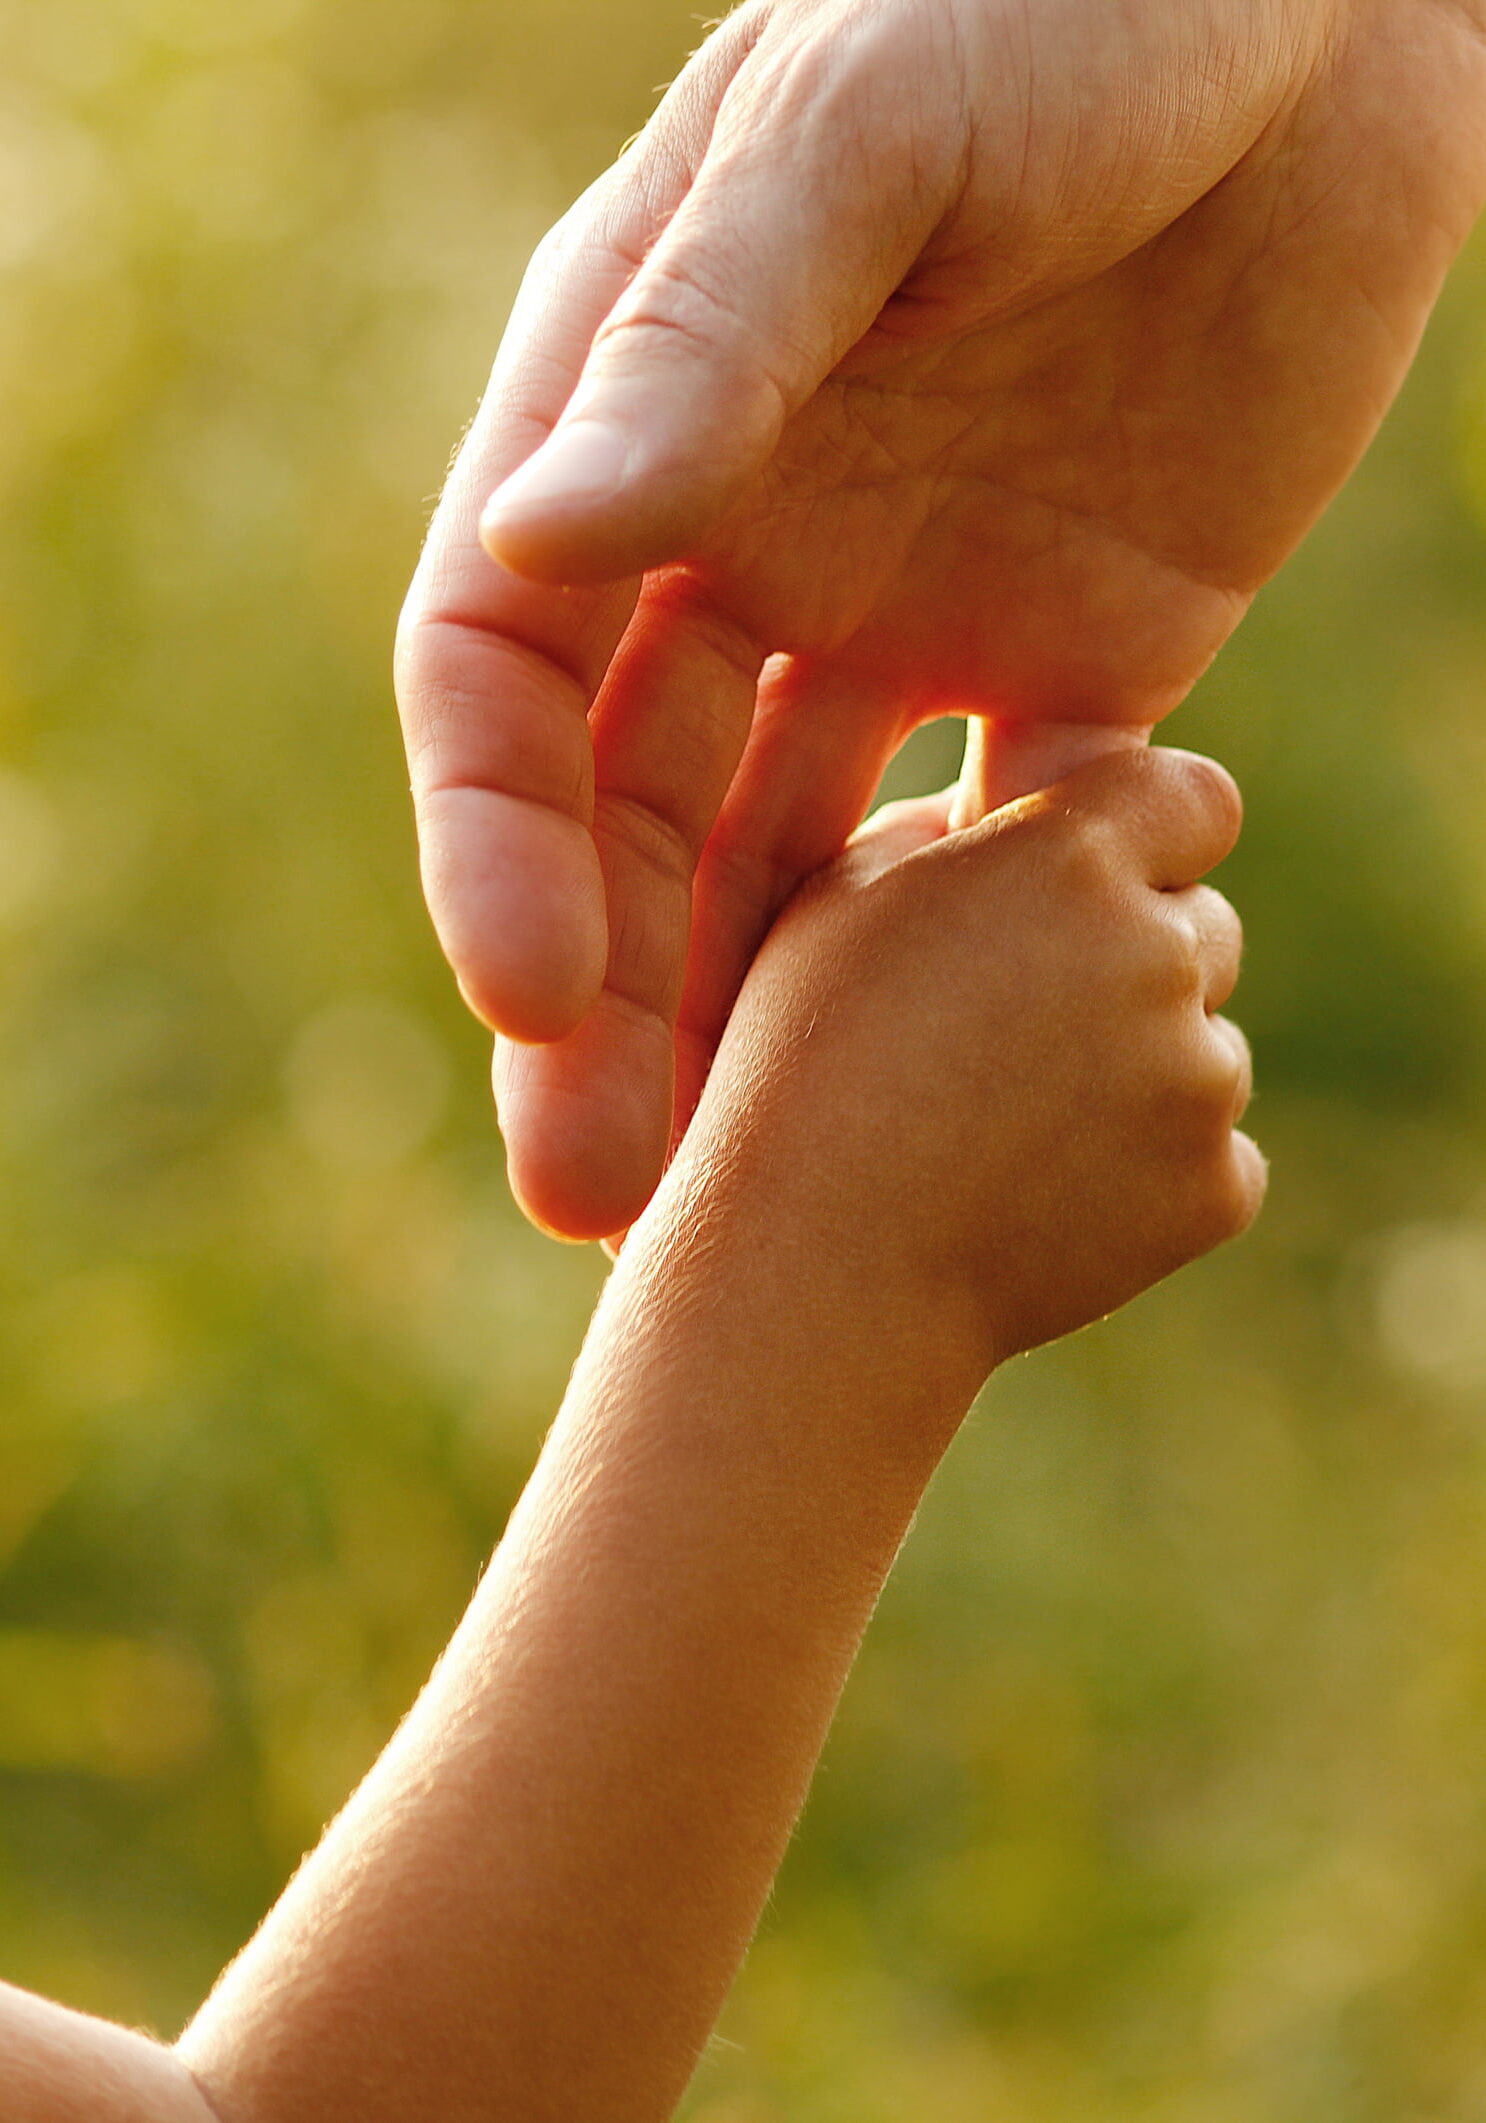 A parent holding the hand of their small child in the grass.